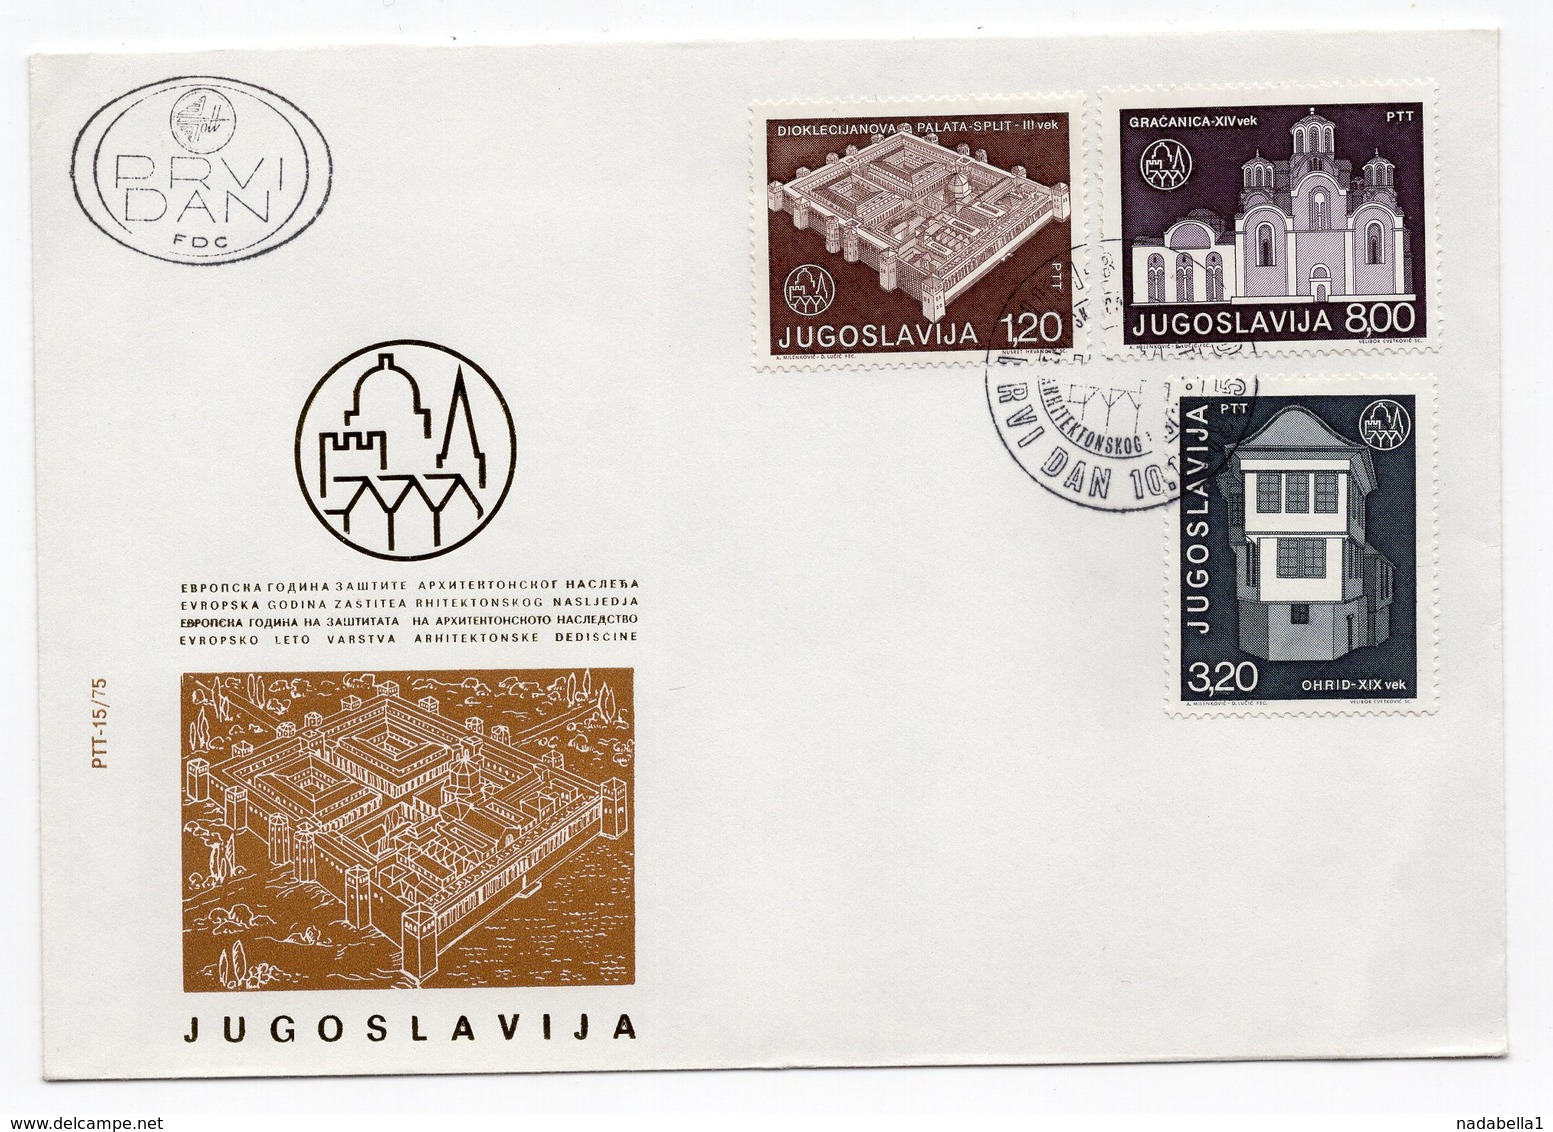 YUGOSLAVIA, FDC, 10.12.1975, COMMEMORATIVE ISSUE: EUROPEAN YEAR, PROTECTION OF ARCHITECTURAL HERITAGE - FDC